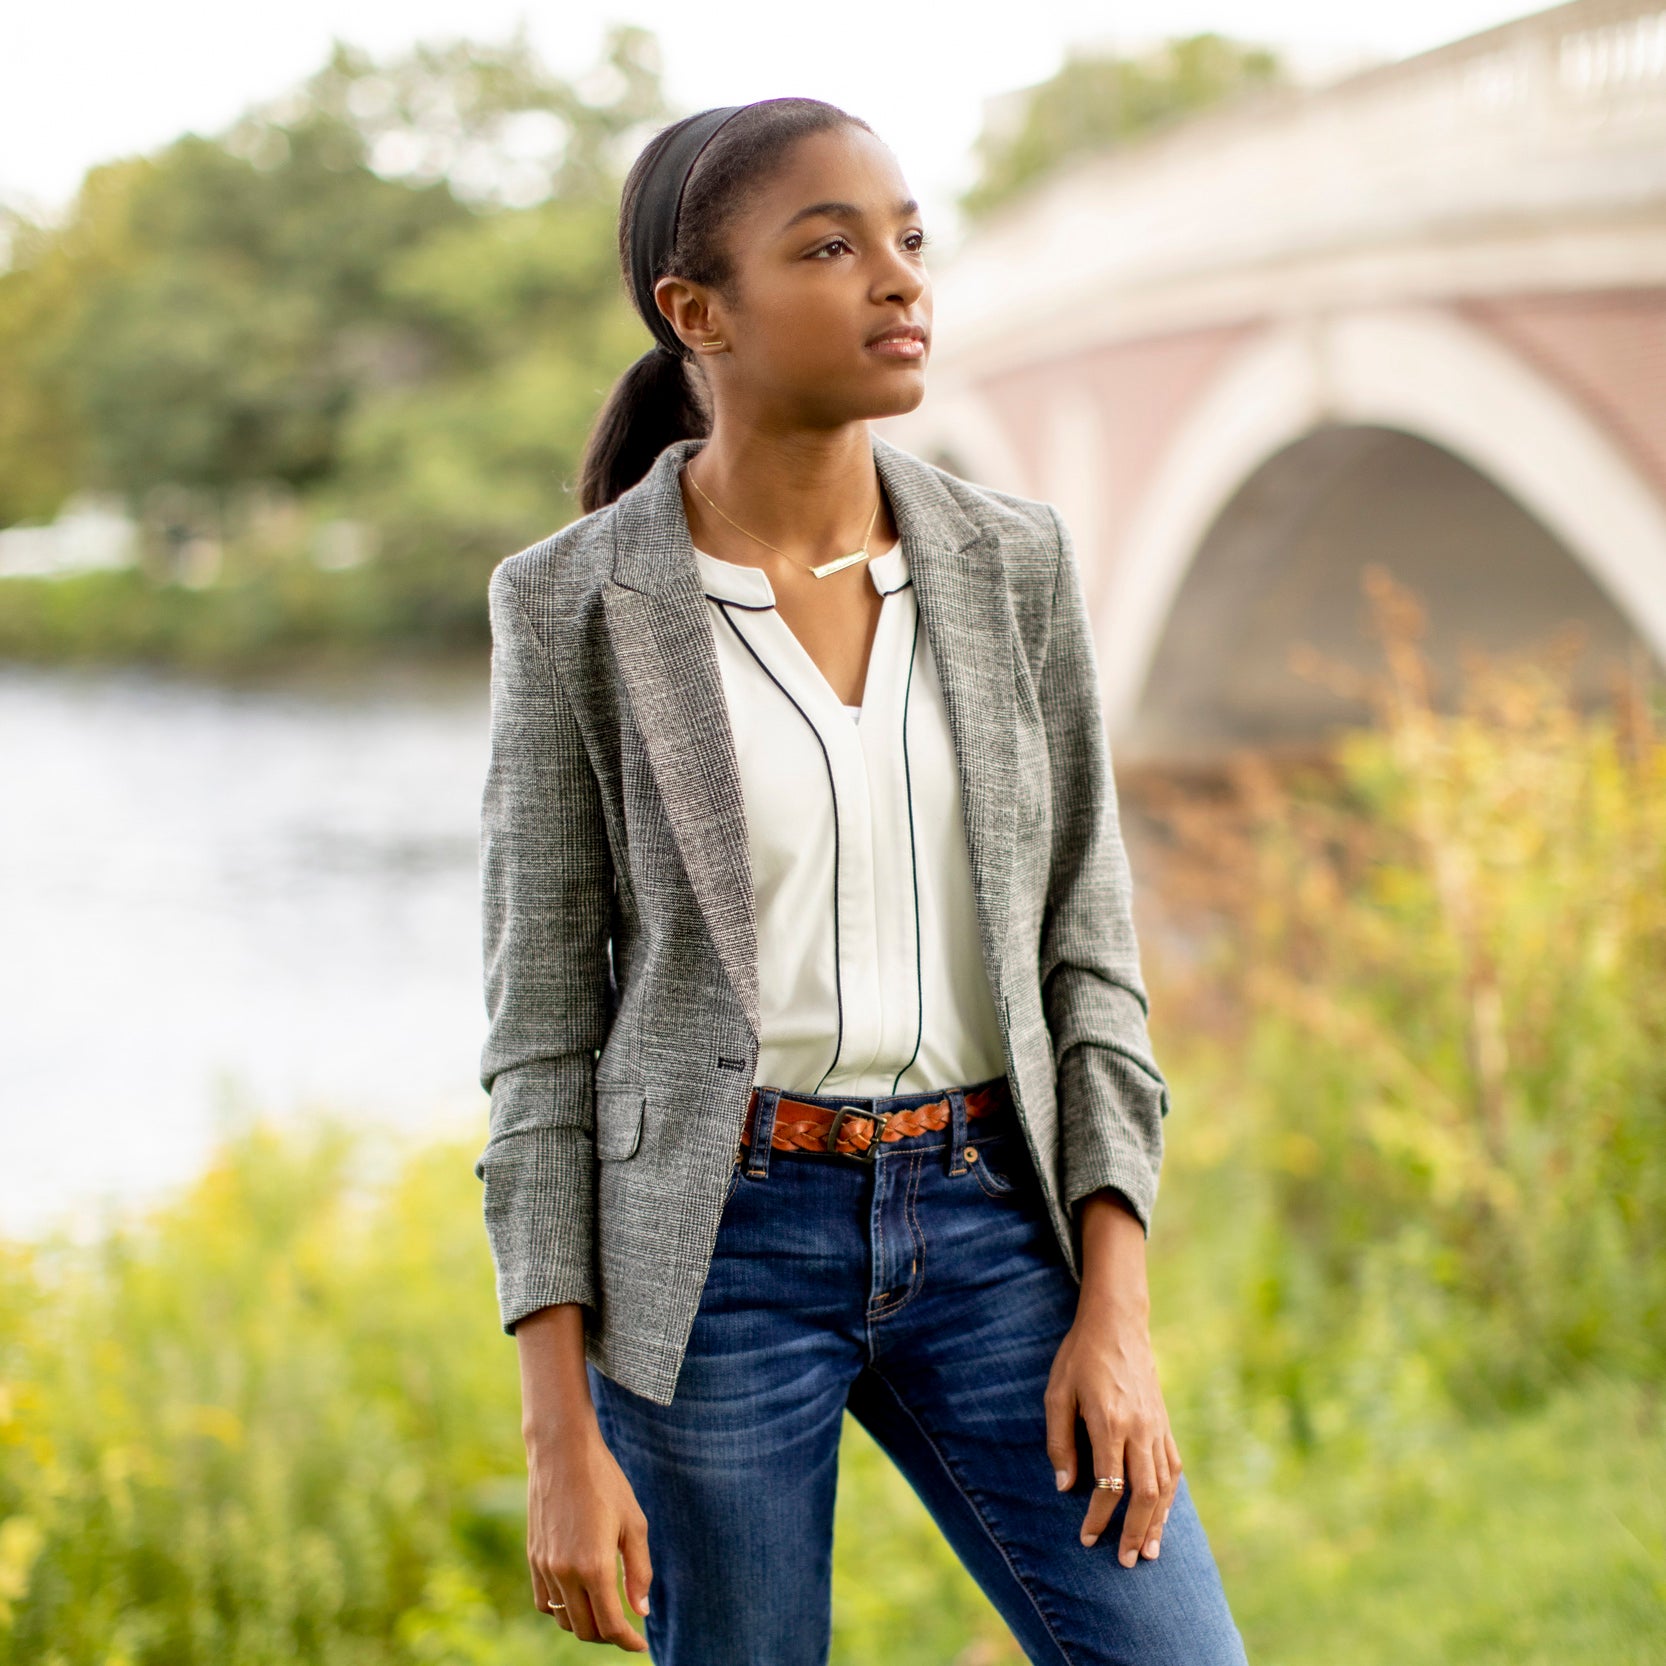 A student stands outside near a river and bridge